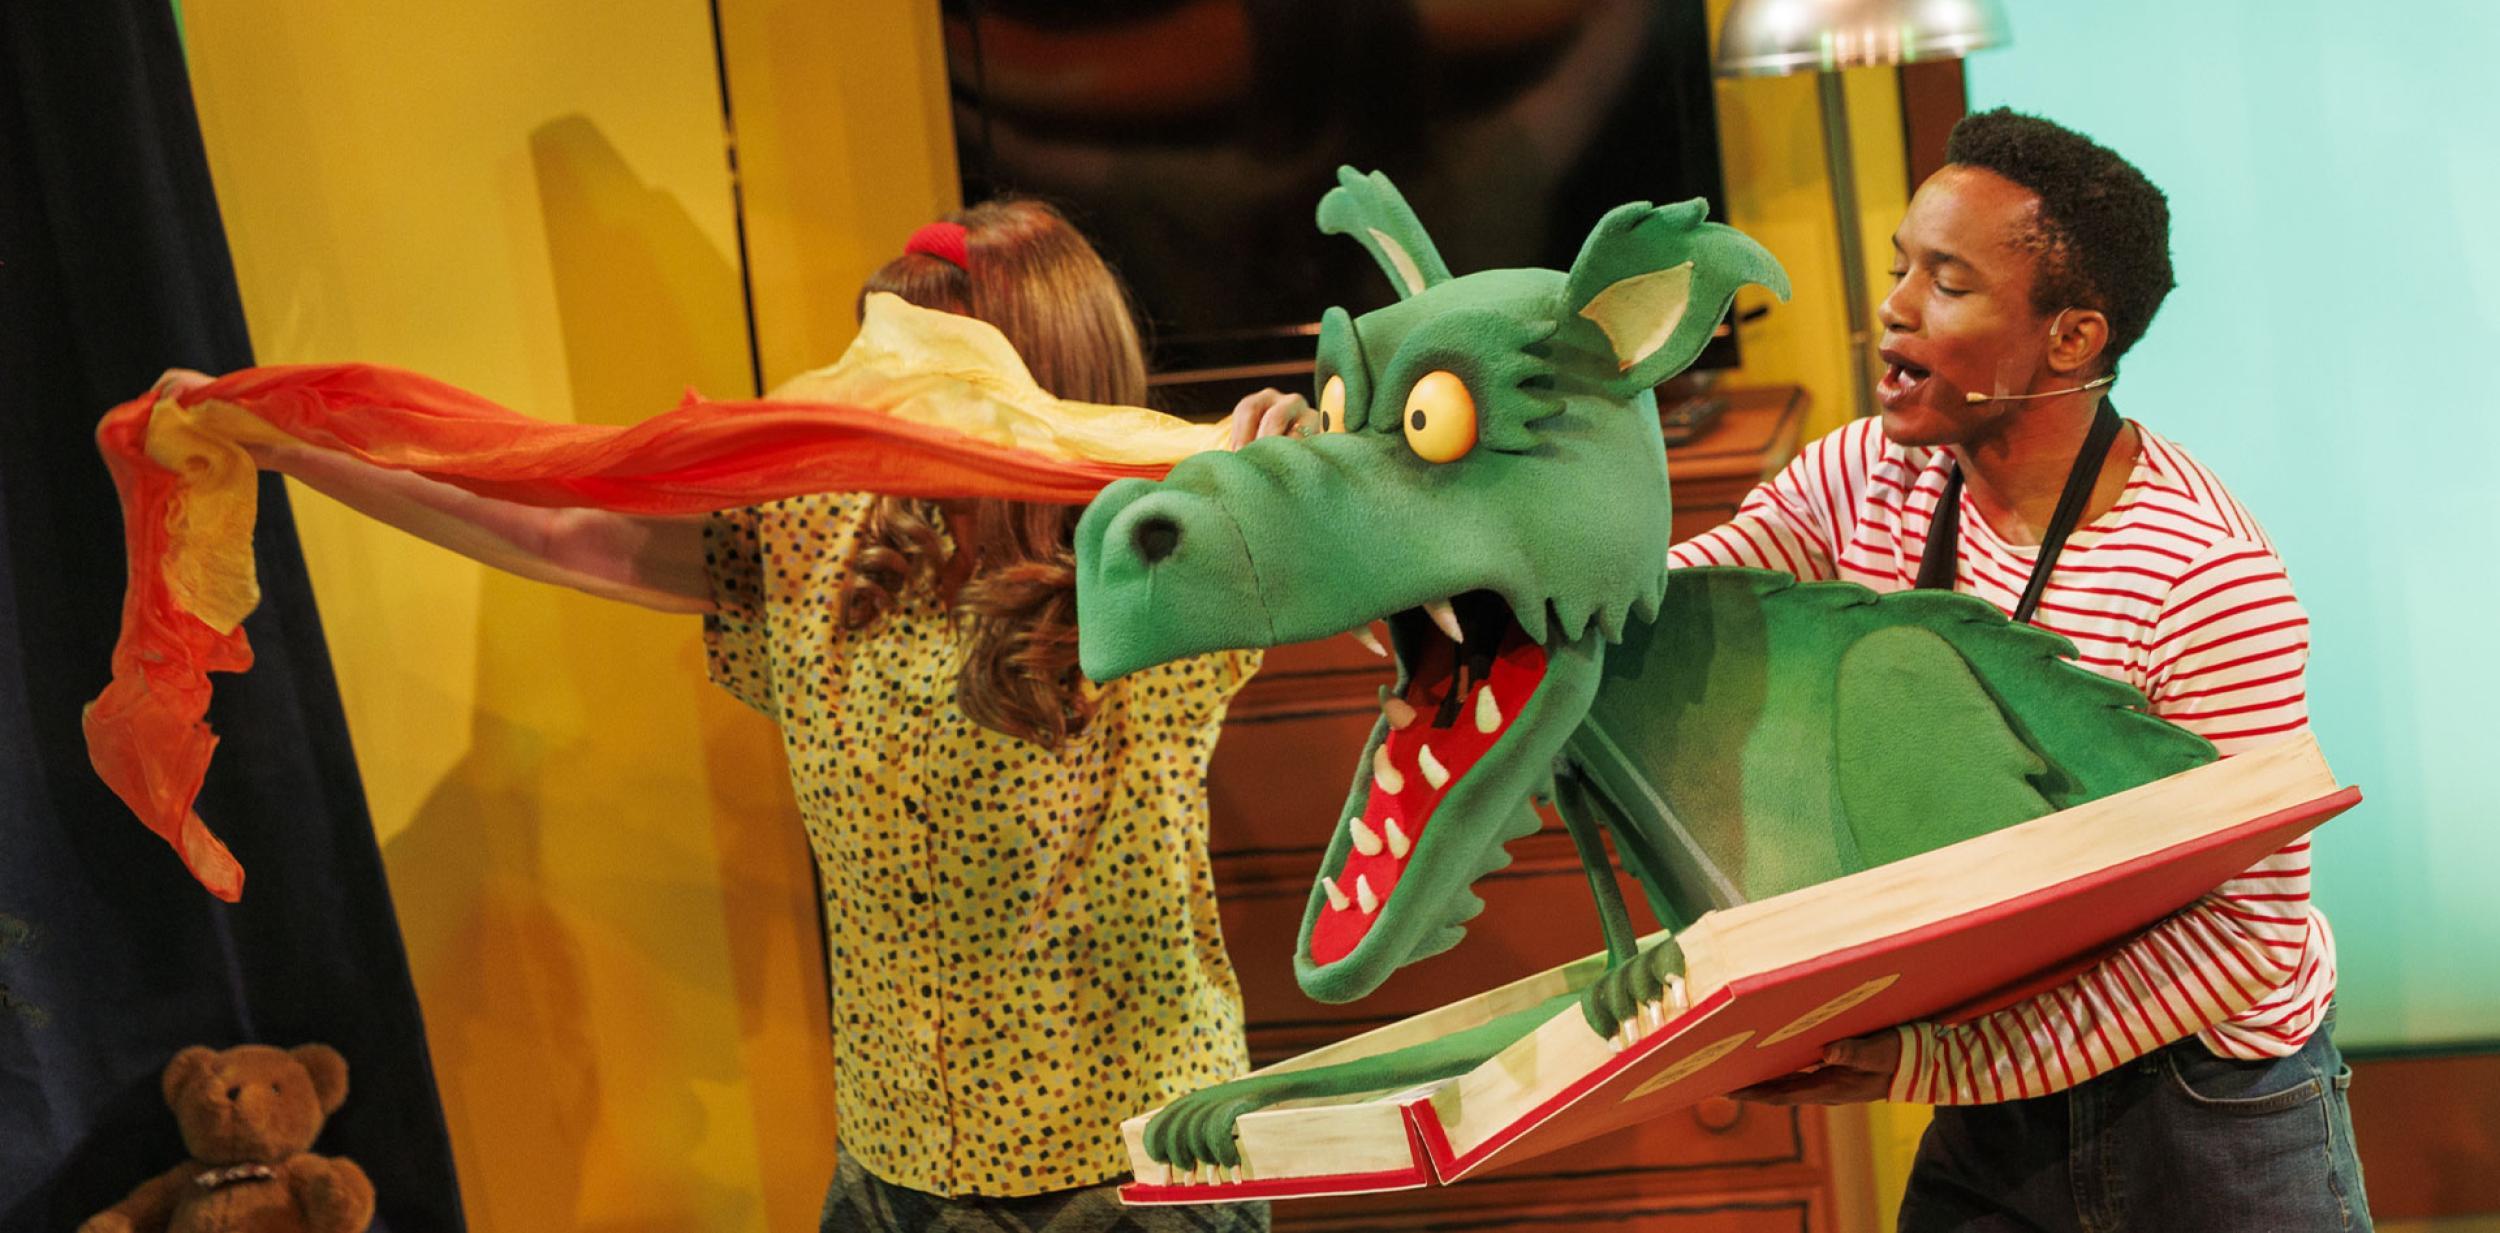 A large green dragon puppet emerging from an open book